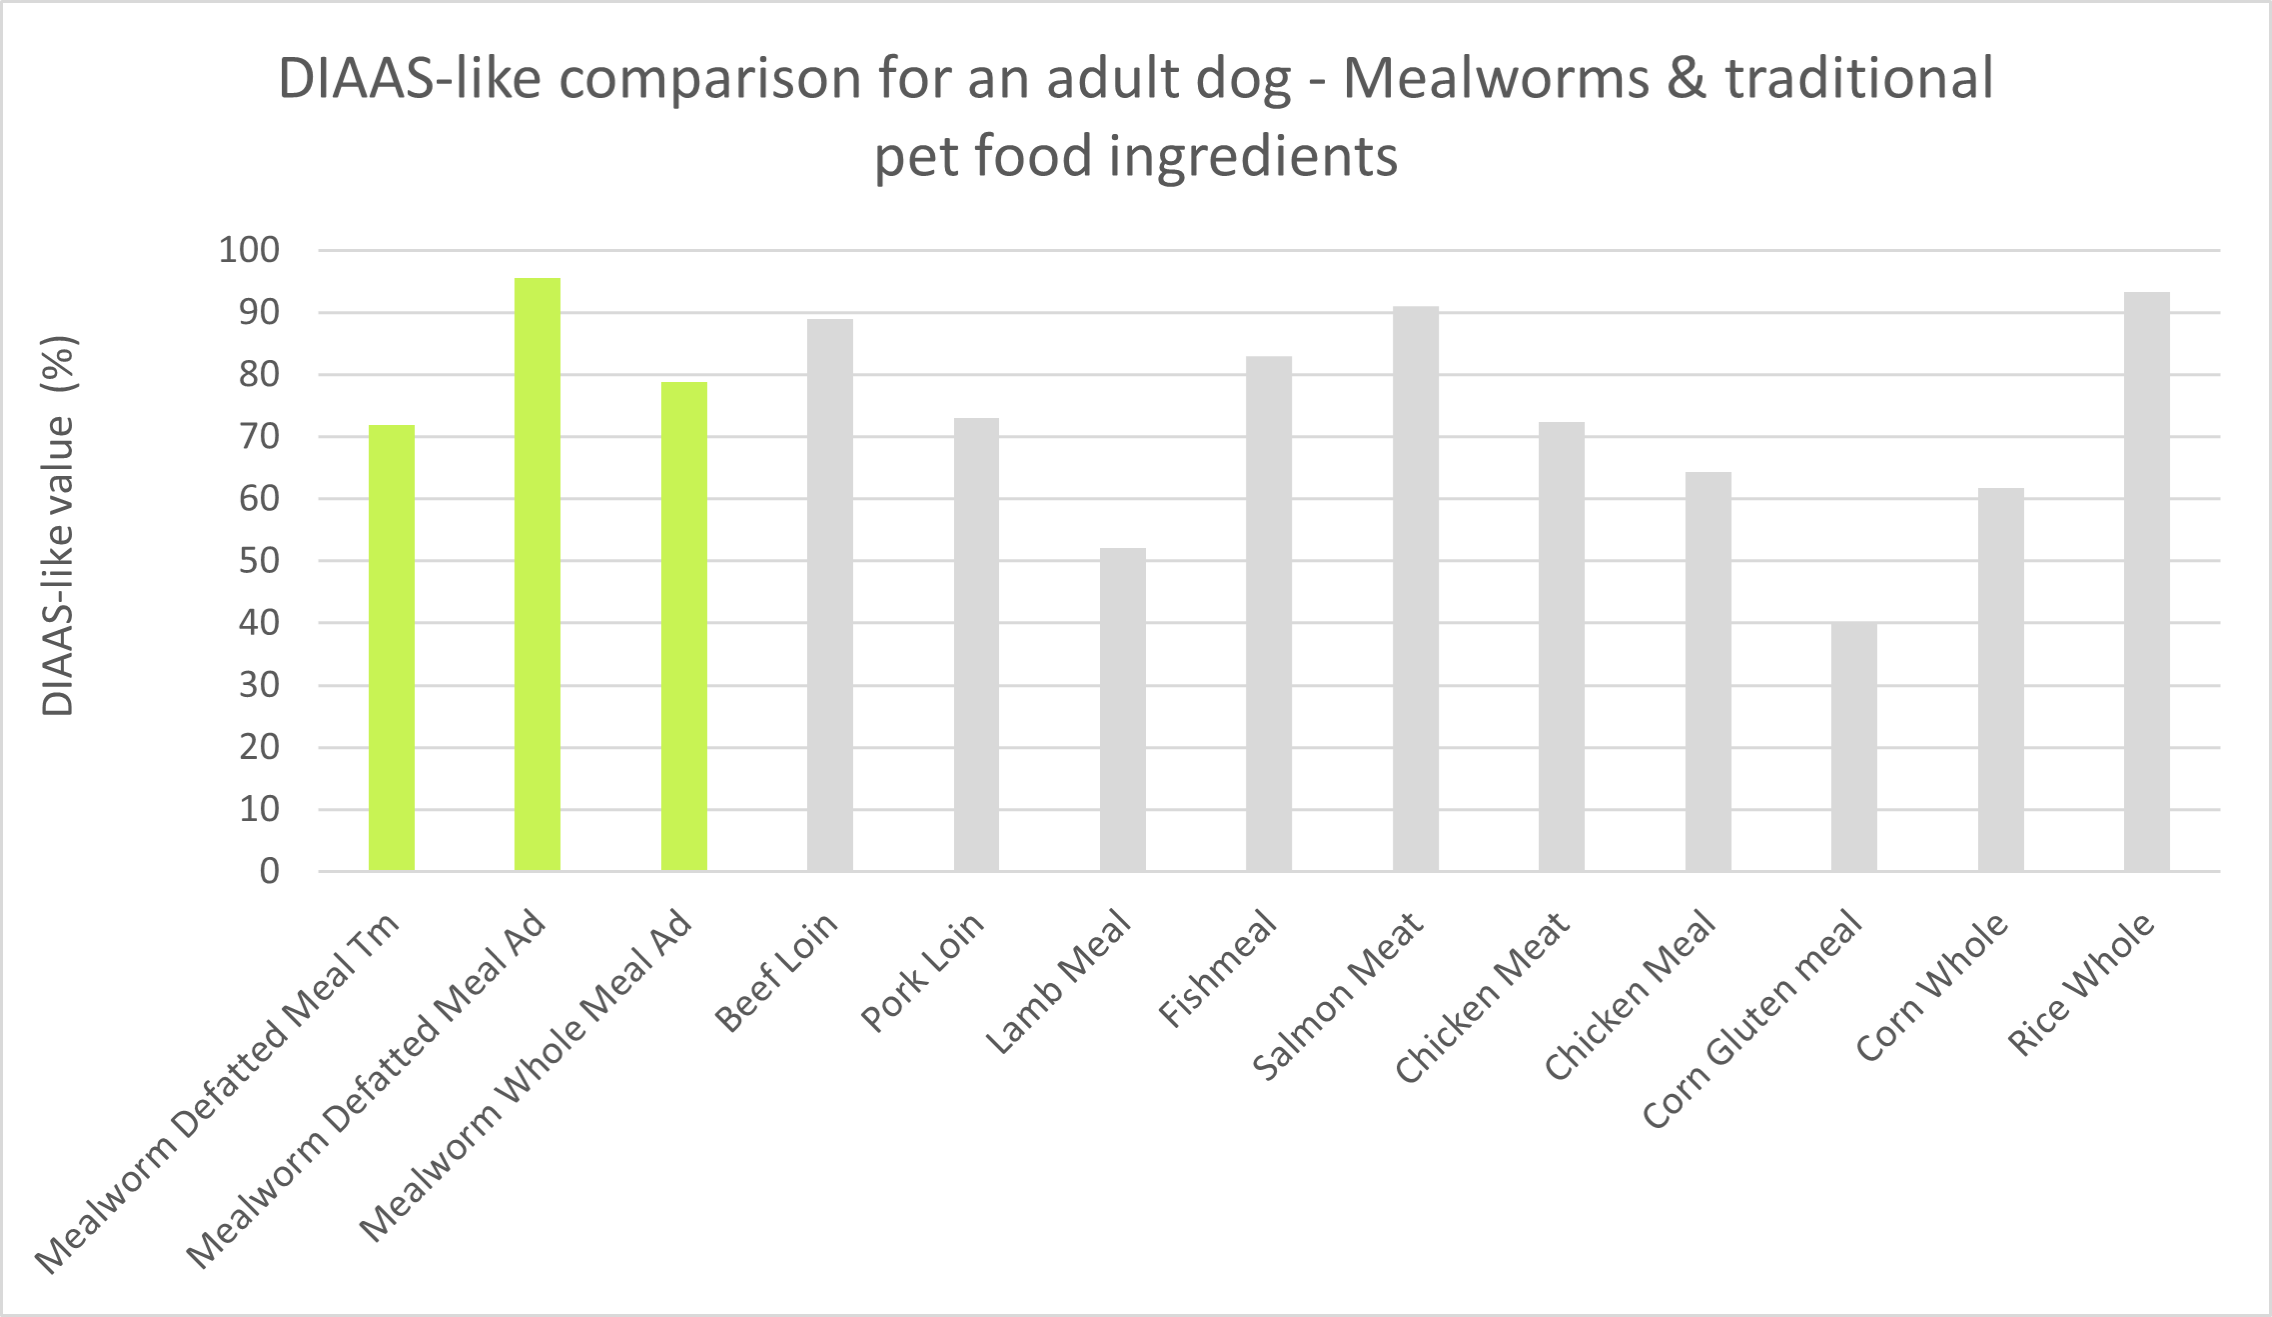 Graphic about DIAAS-like comparison for an adult dog - mealworms and traditional pet food ingredients